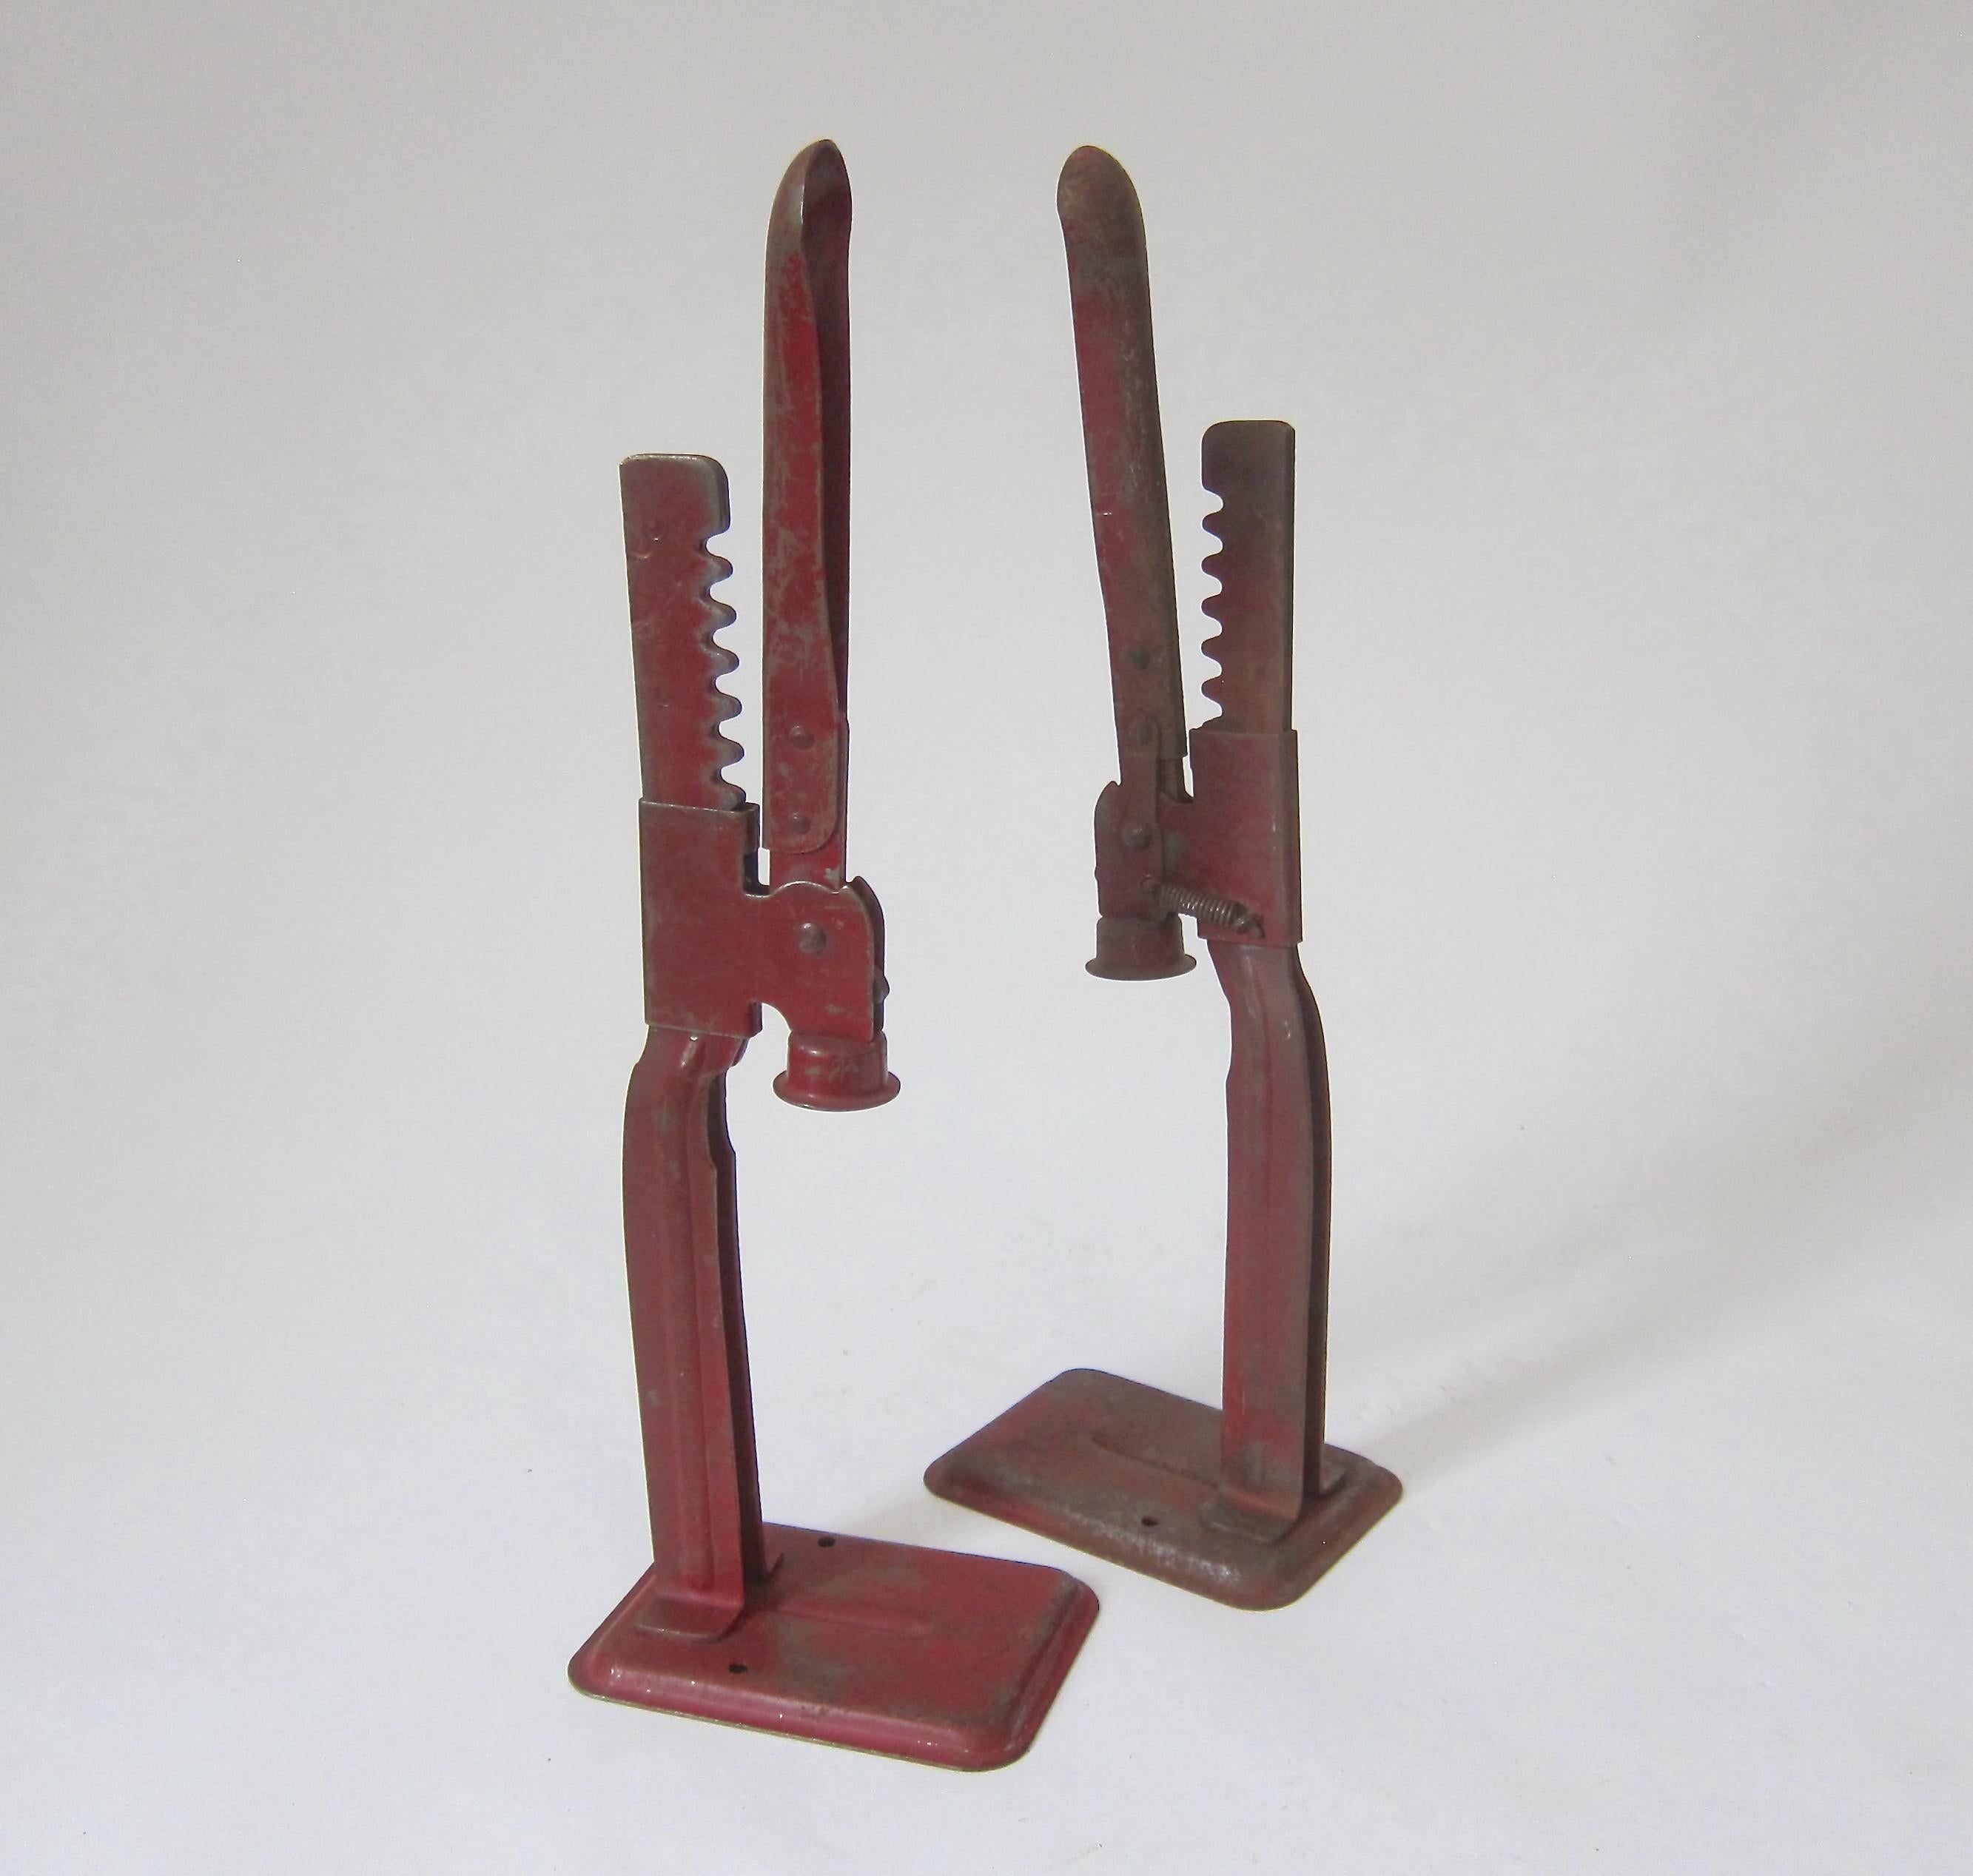 Two bottle capping tools in painted red metal dating to the Prohibition Era in America. The Industrial Design, called Climax, was patented in the late 1920s by Harry J. Lebherz for the Everedy Company of Frederick, Maryland. These devices enjoyed a